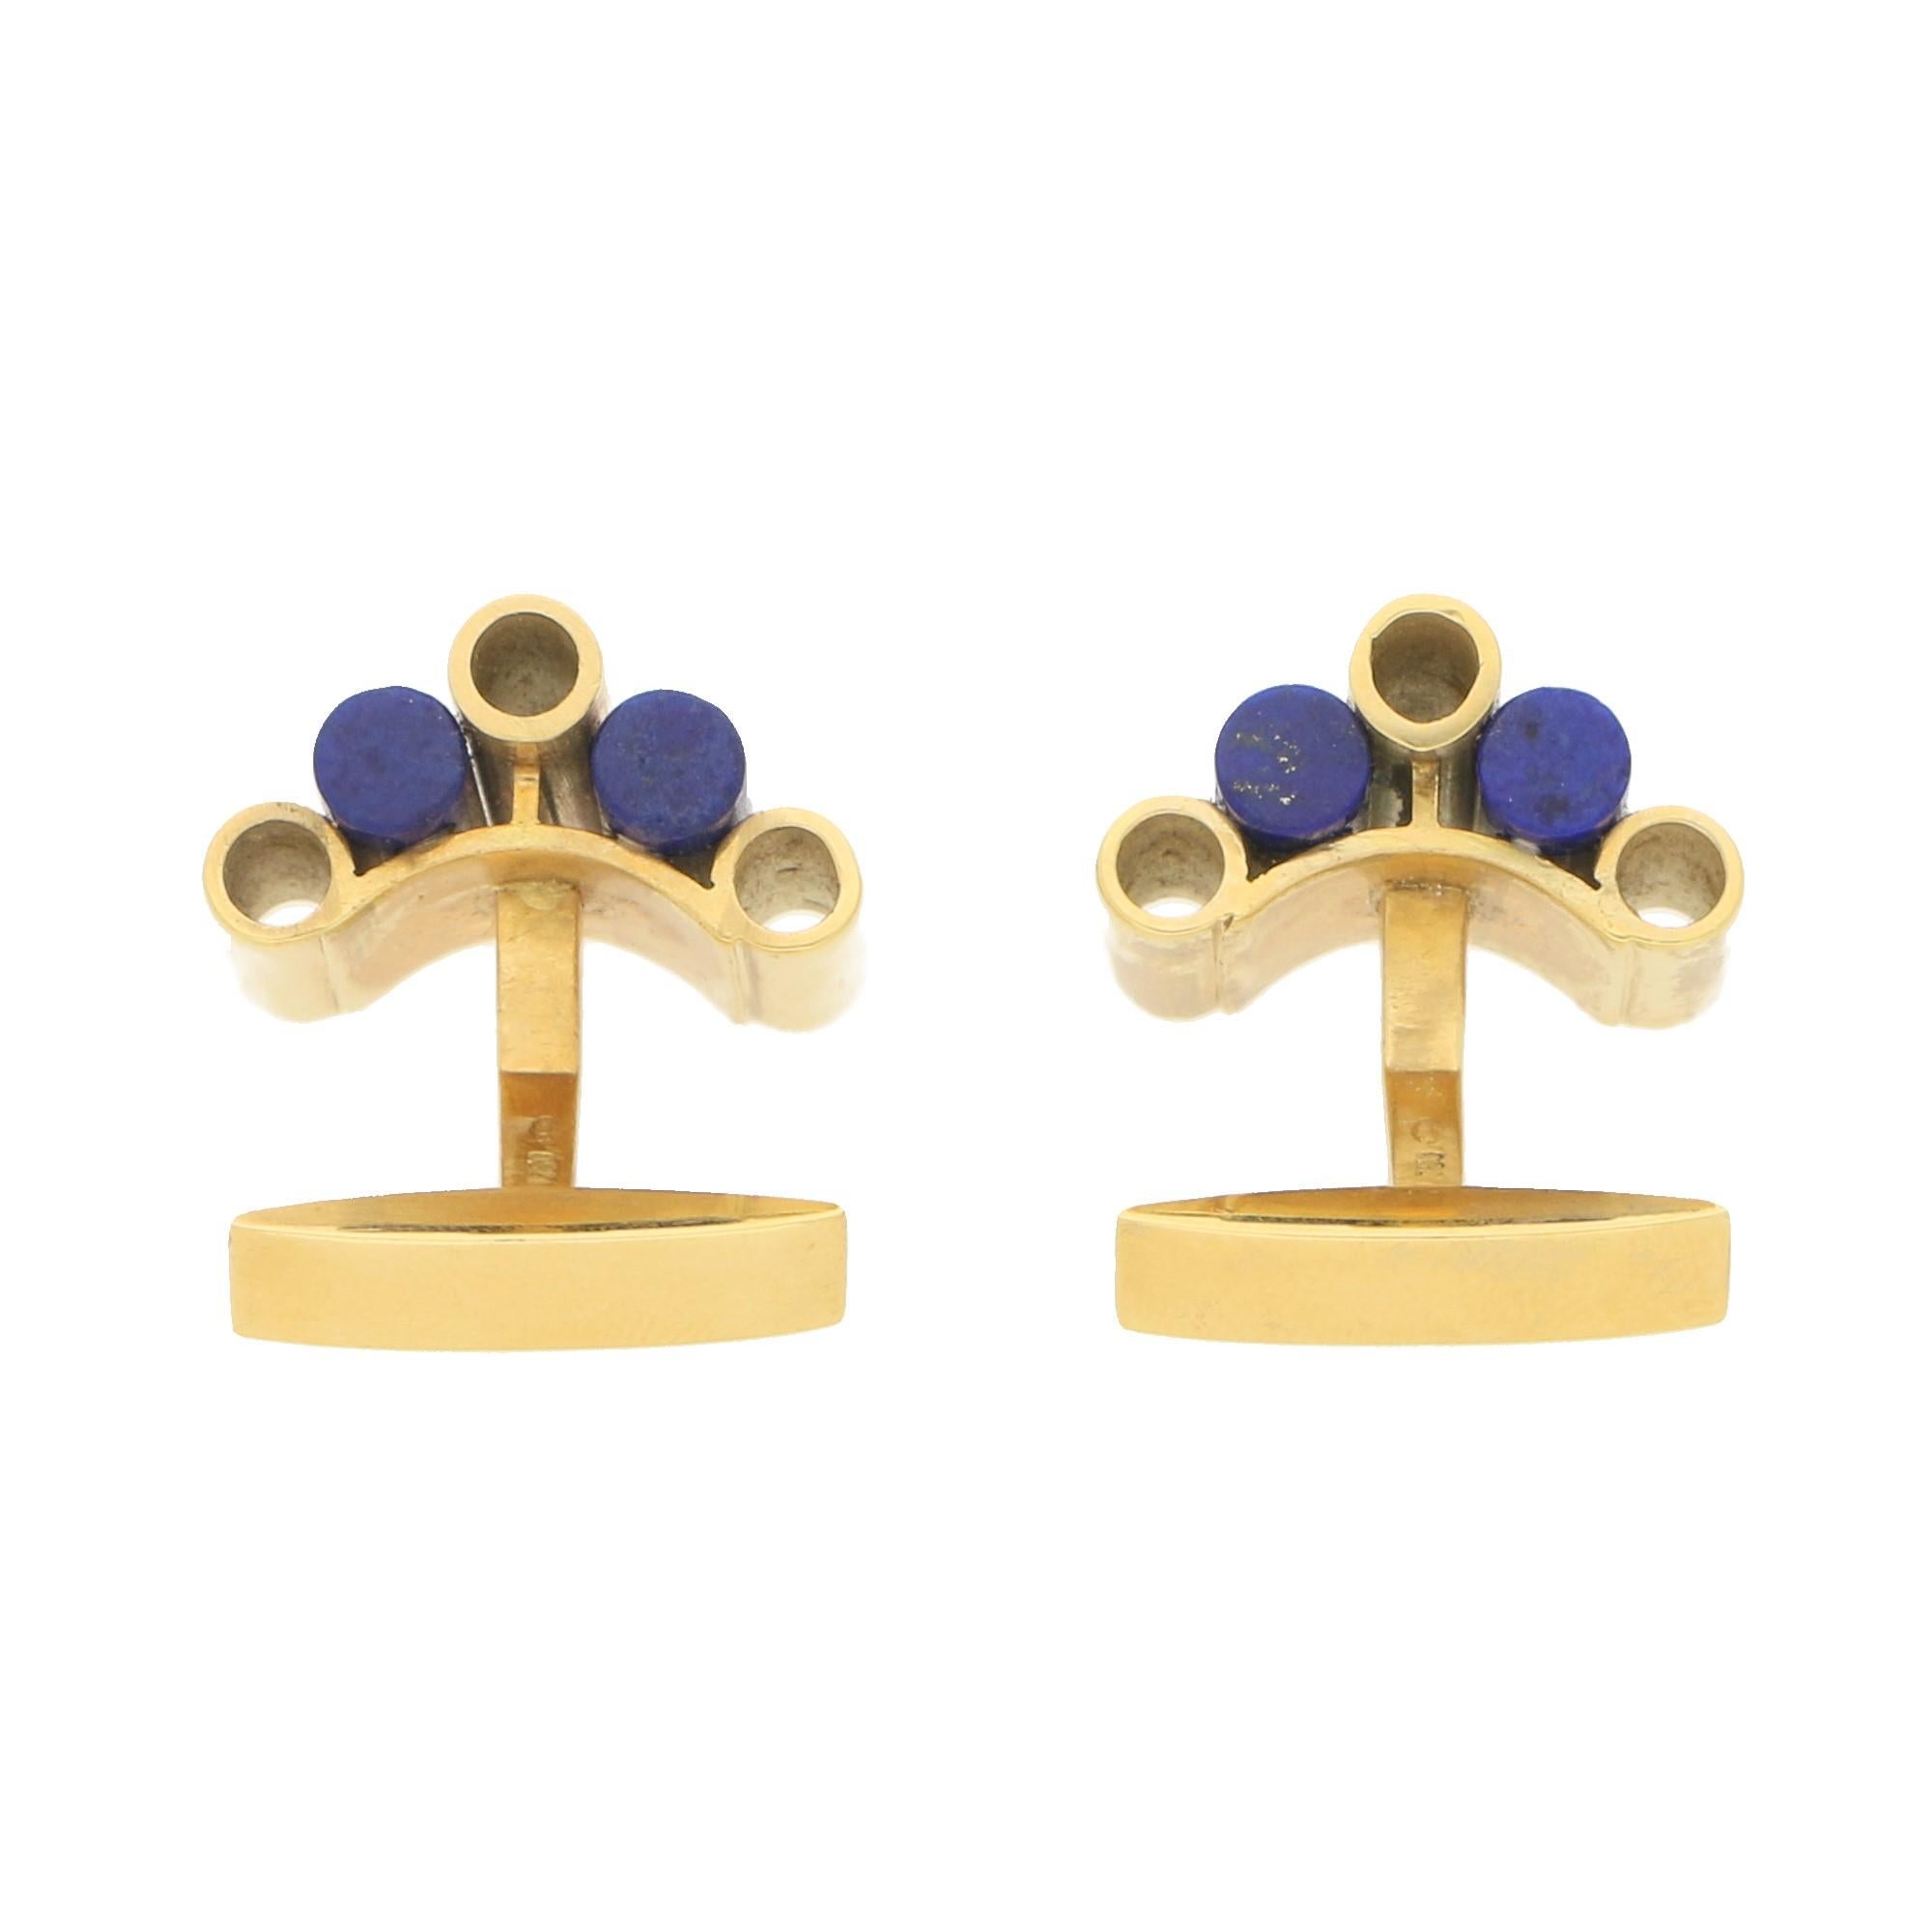 A lovely pair of Art Deco inspired lapis lazuli cufflinks set in 18k Yellow Gold, circa 1940.

Each cufflink is set with two baton shaped lapis lazuli bars with similar yellow gold batons to each side. The baton's graduate in size creating this